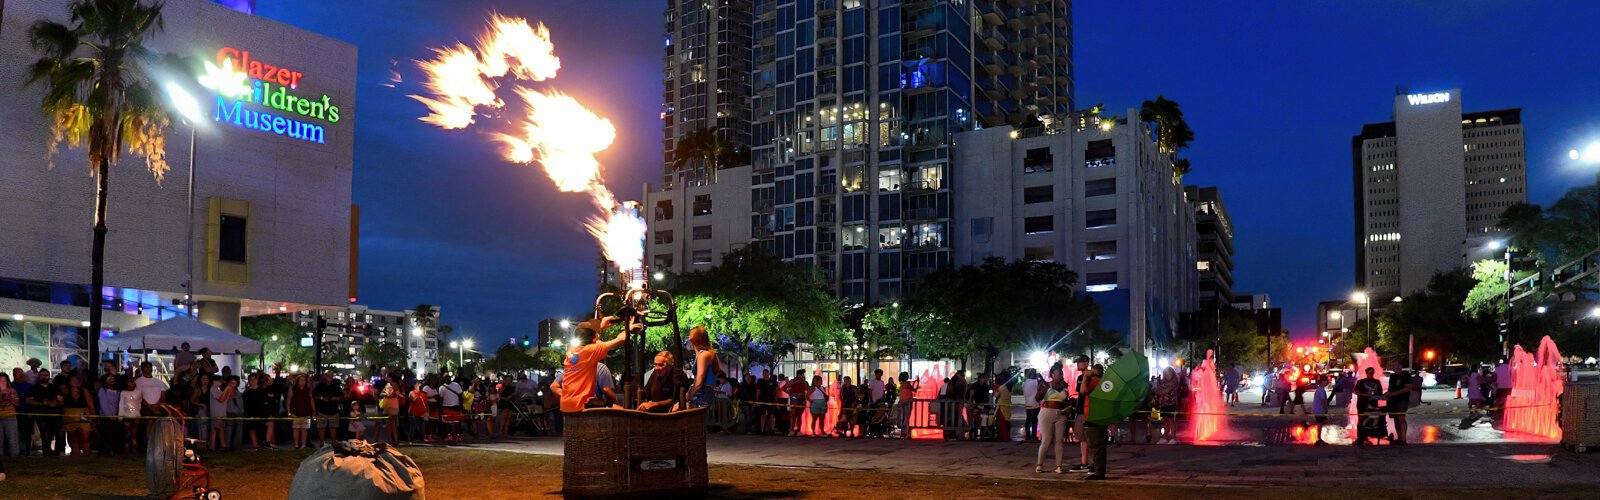 Due to unfavorable weather conditions, the Saturday Balloon Glow was transformed from an inflated balloon glow to a burner flame glow celebrating Tampa Riverfest at Curtis Hixon Waterfront Park.